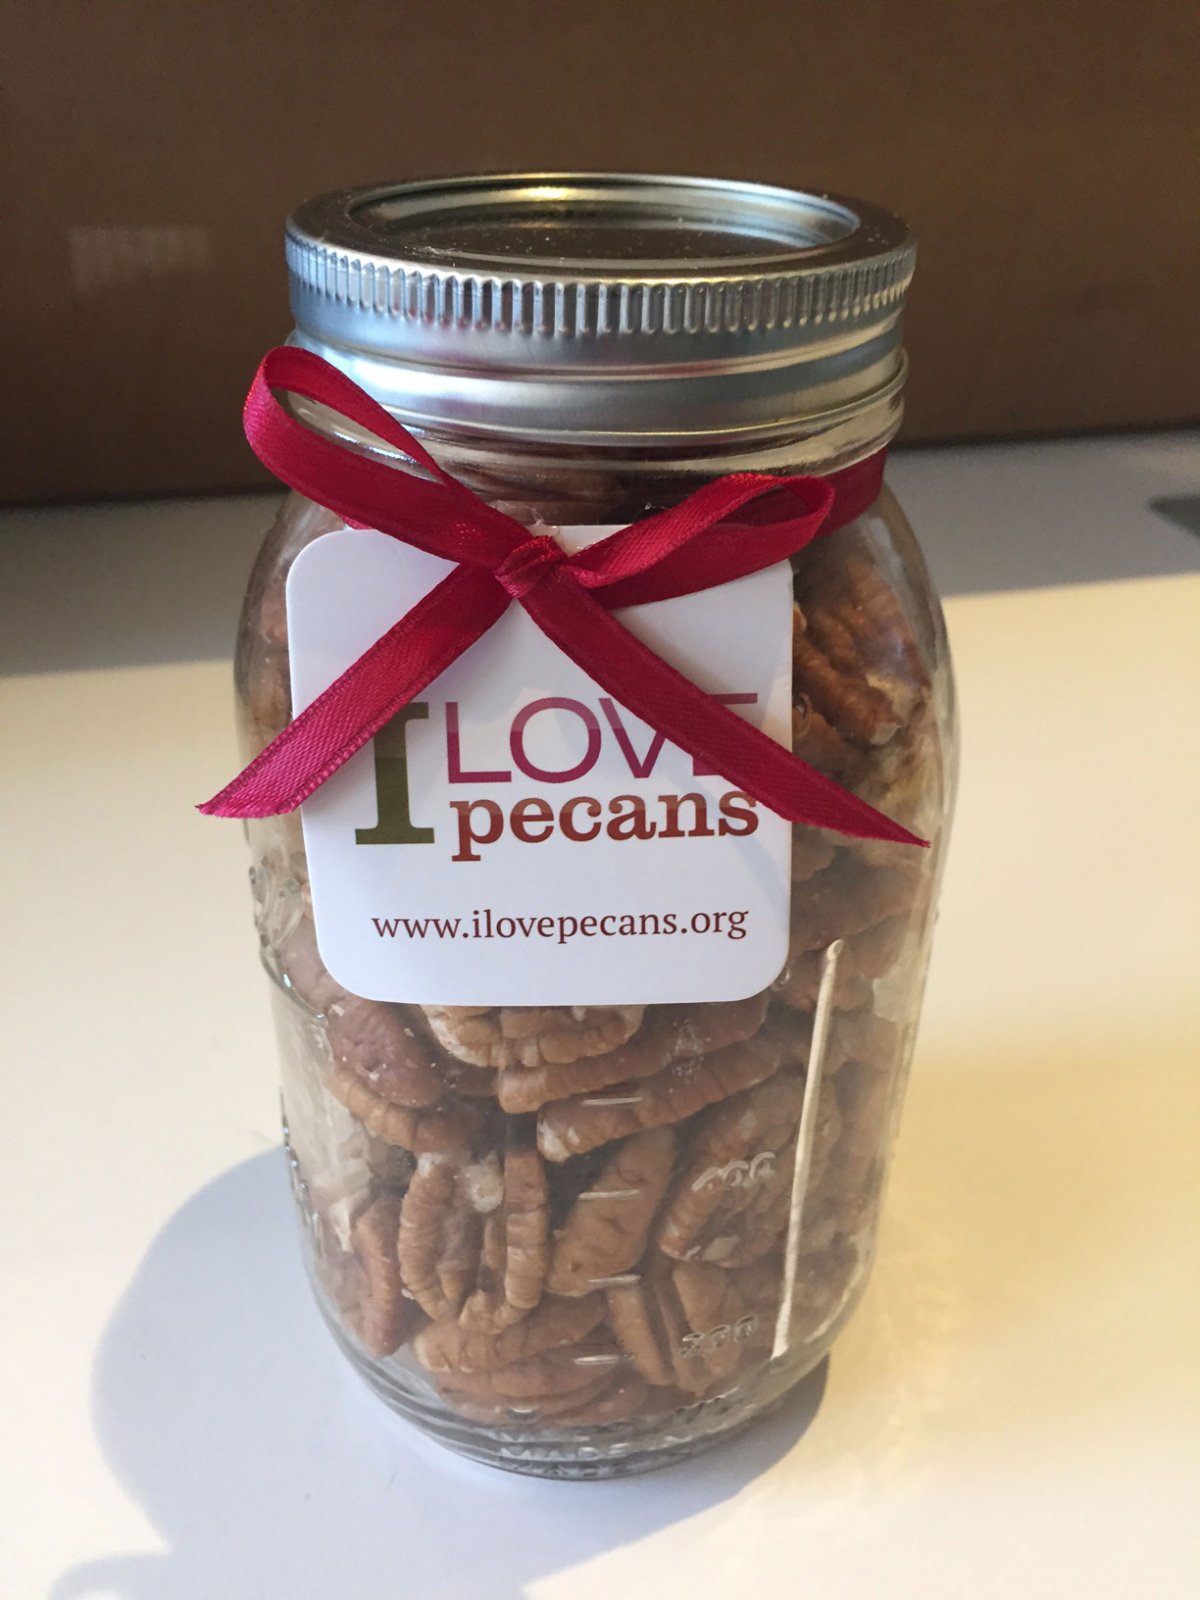 you-get-a-jar-of-pecans-from-the-pecan-shellers-association